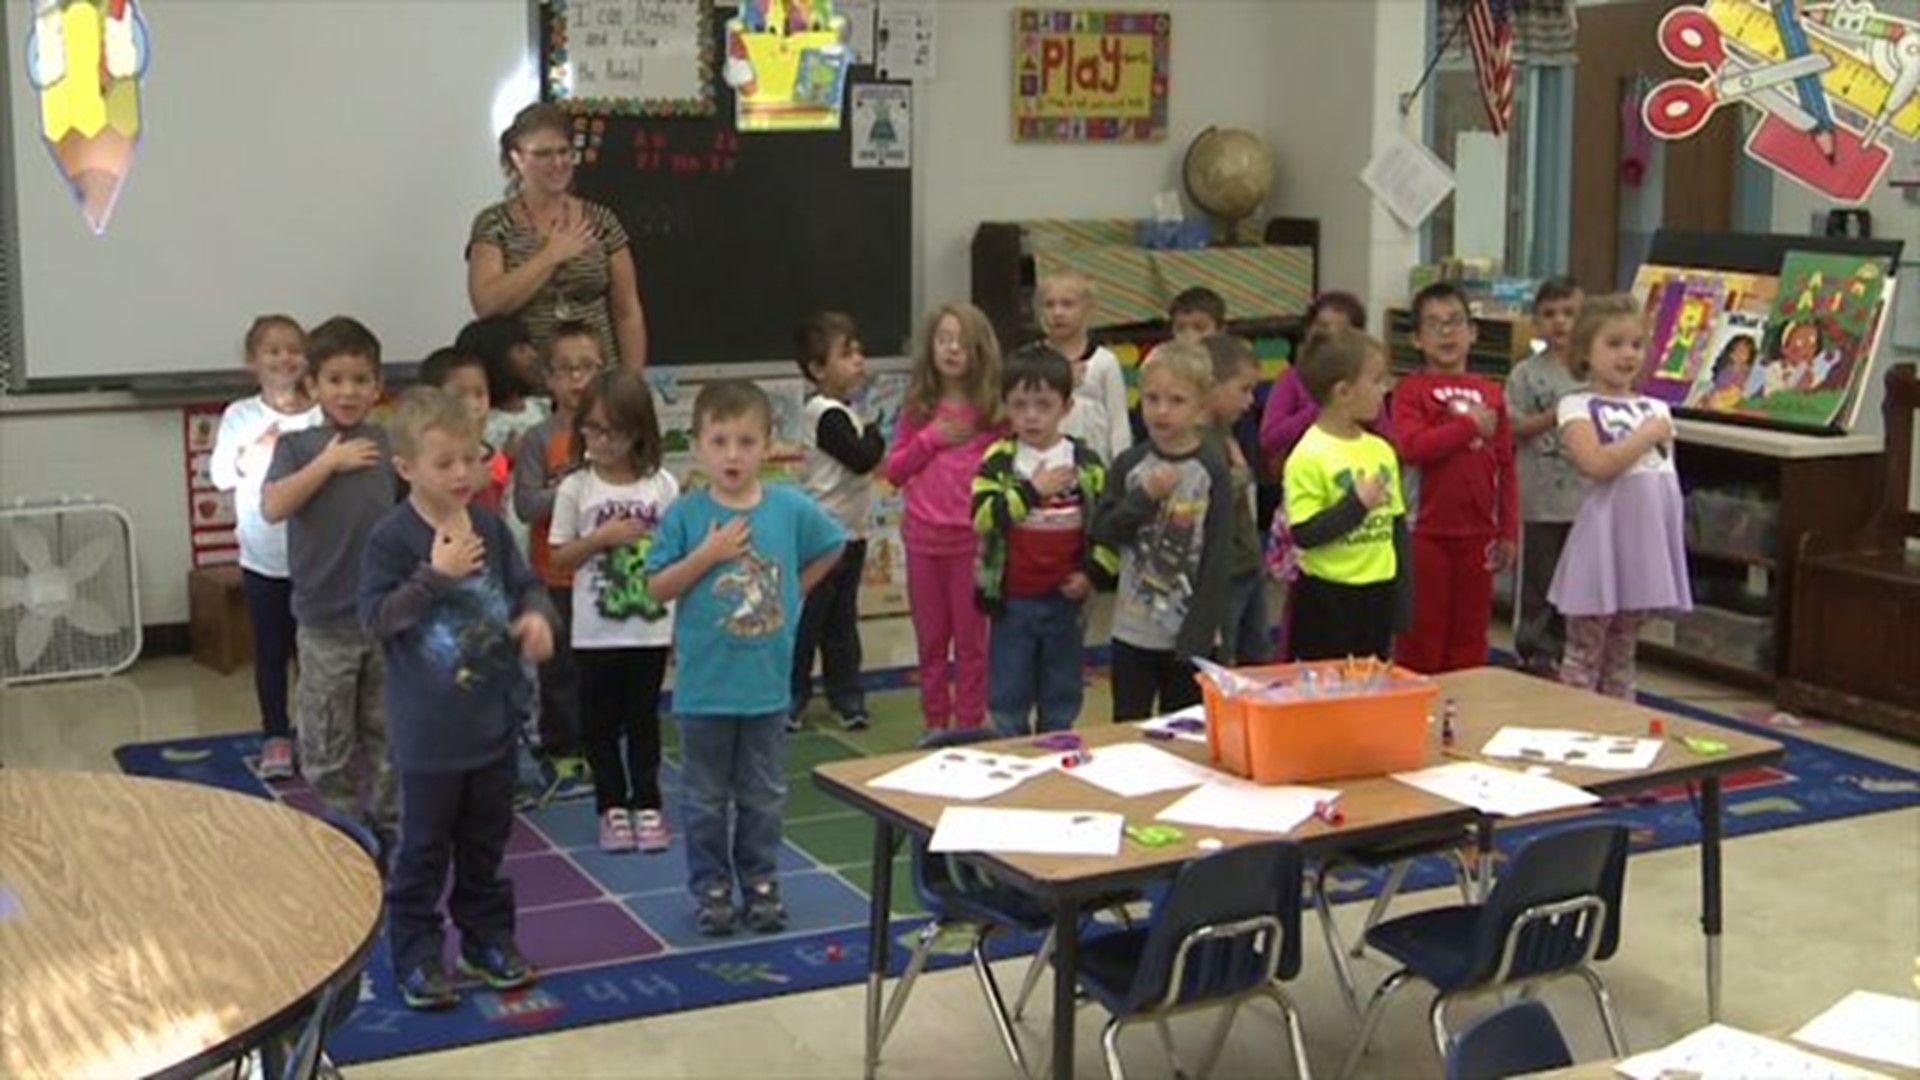 The Pledge of Allegiance from Mrs. Vershaw`s class at Jane Addams Elementary